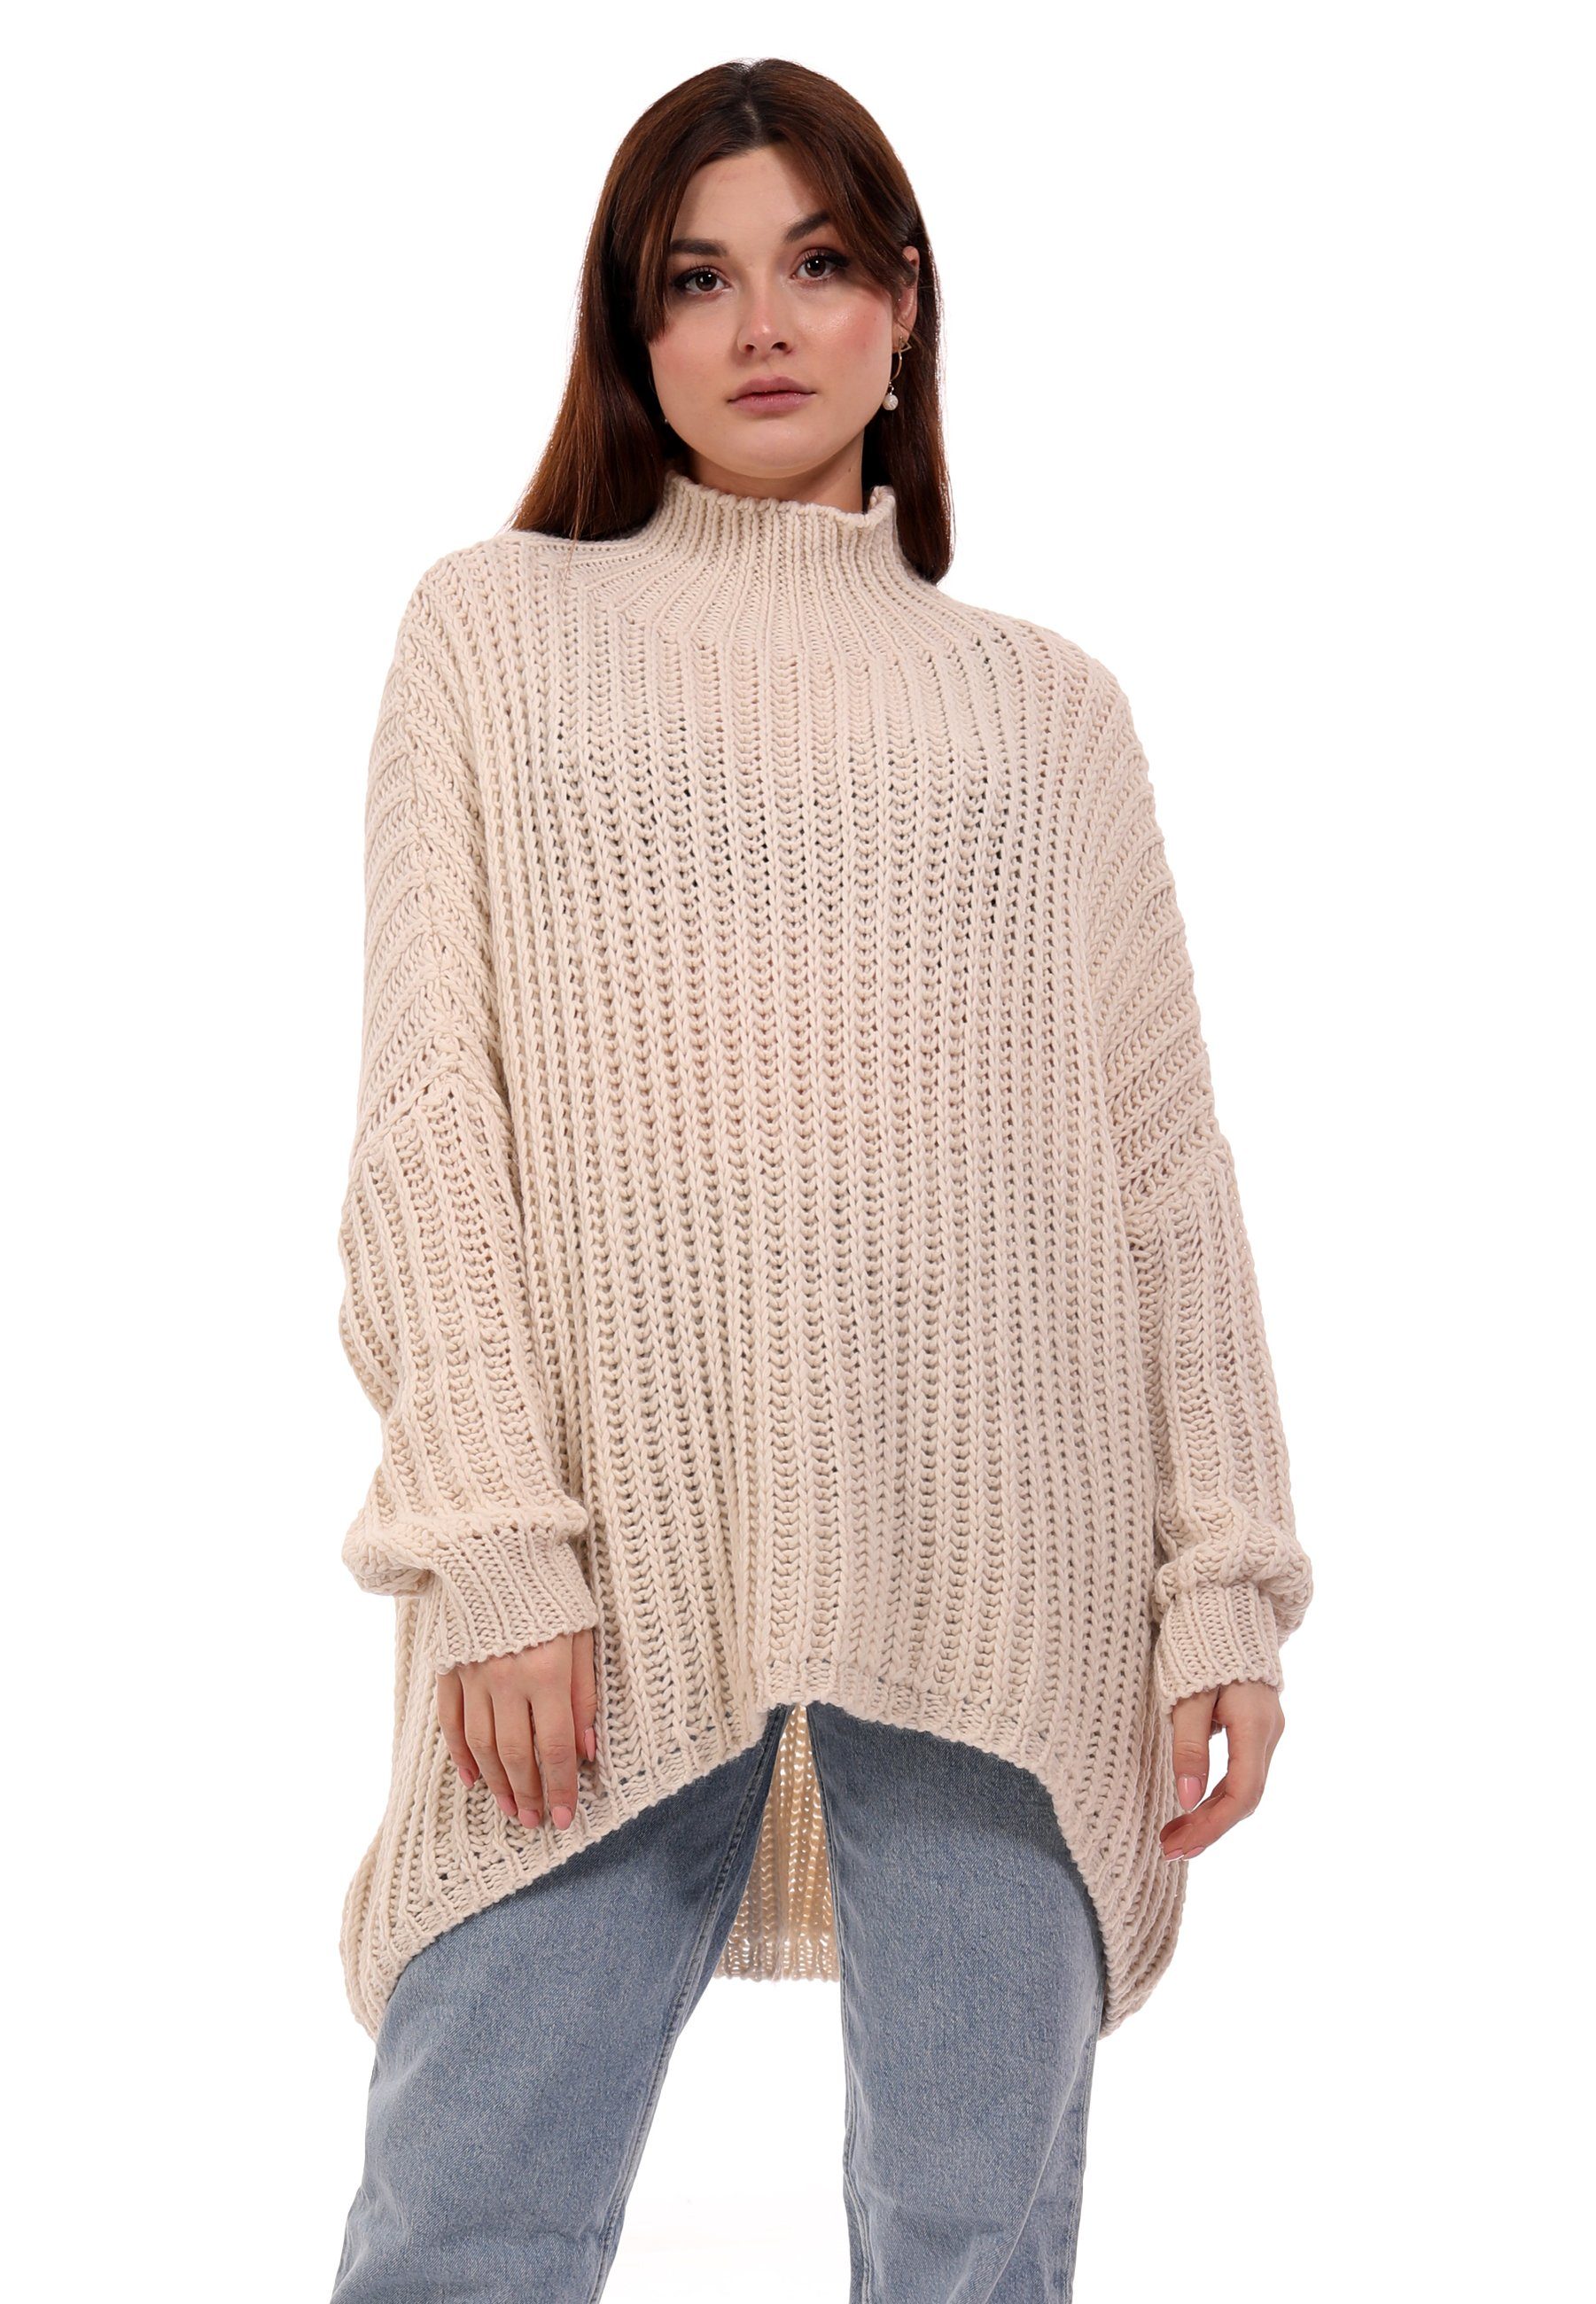 YC Fashion & Style Longpullover Oversized Pullover Grobstrick Vokuhila Sweater One Size (1-tlg) casual wollweiß | Strickpullover